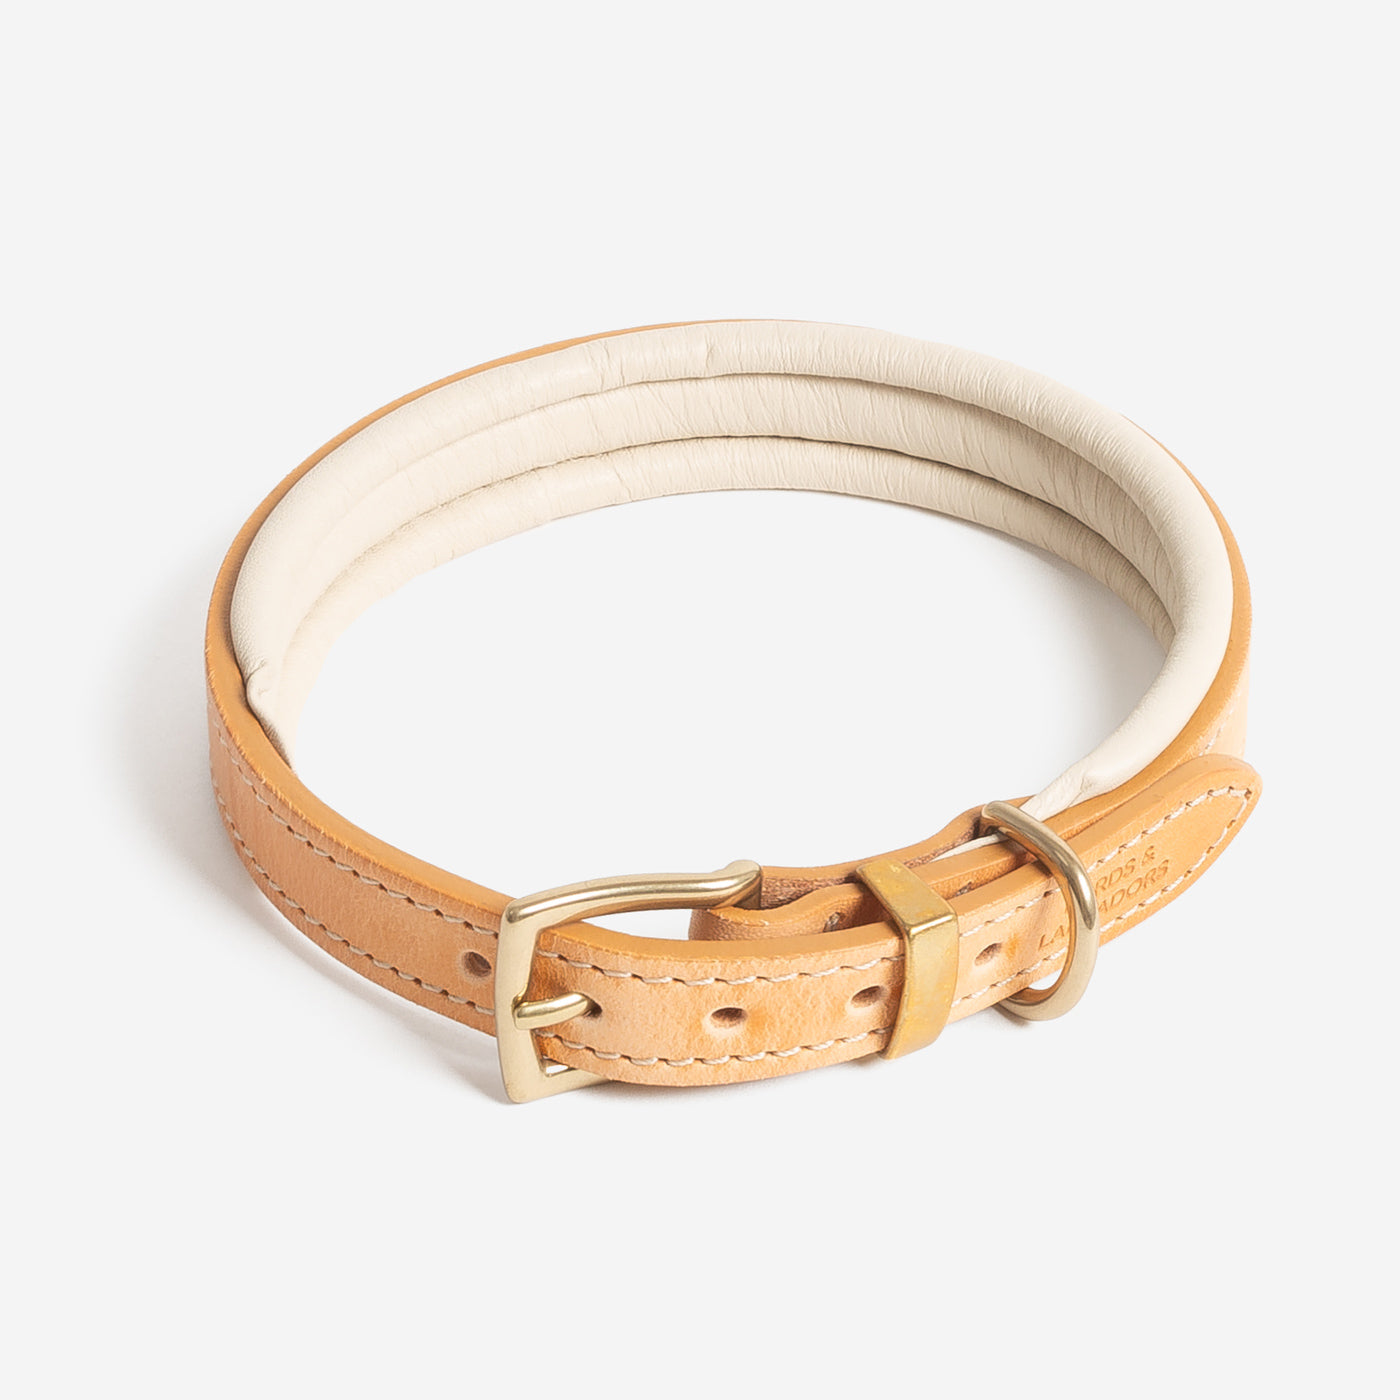 Discover dog walking luxury with our handcrafted Italian padded leather dog collar in Tan & Cream! The perfect collar for dogs available now at Lords & Labradors US